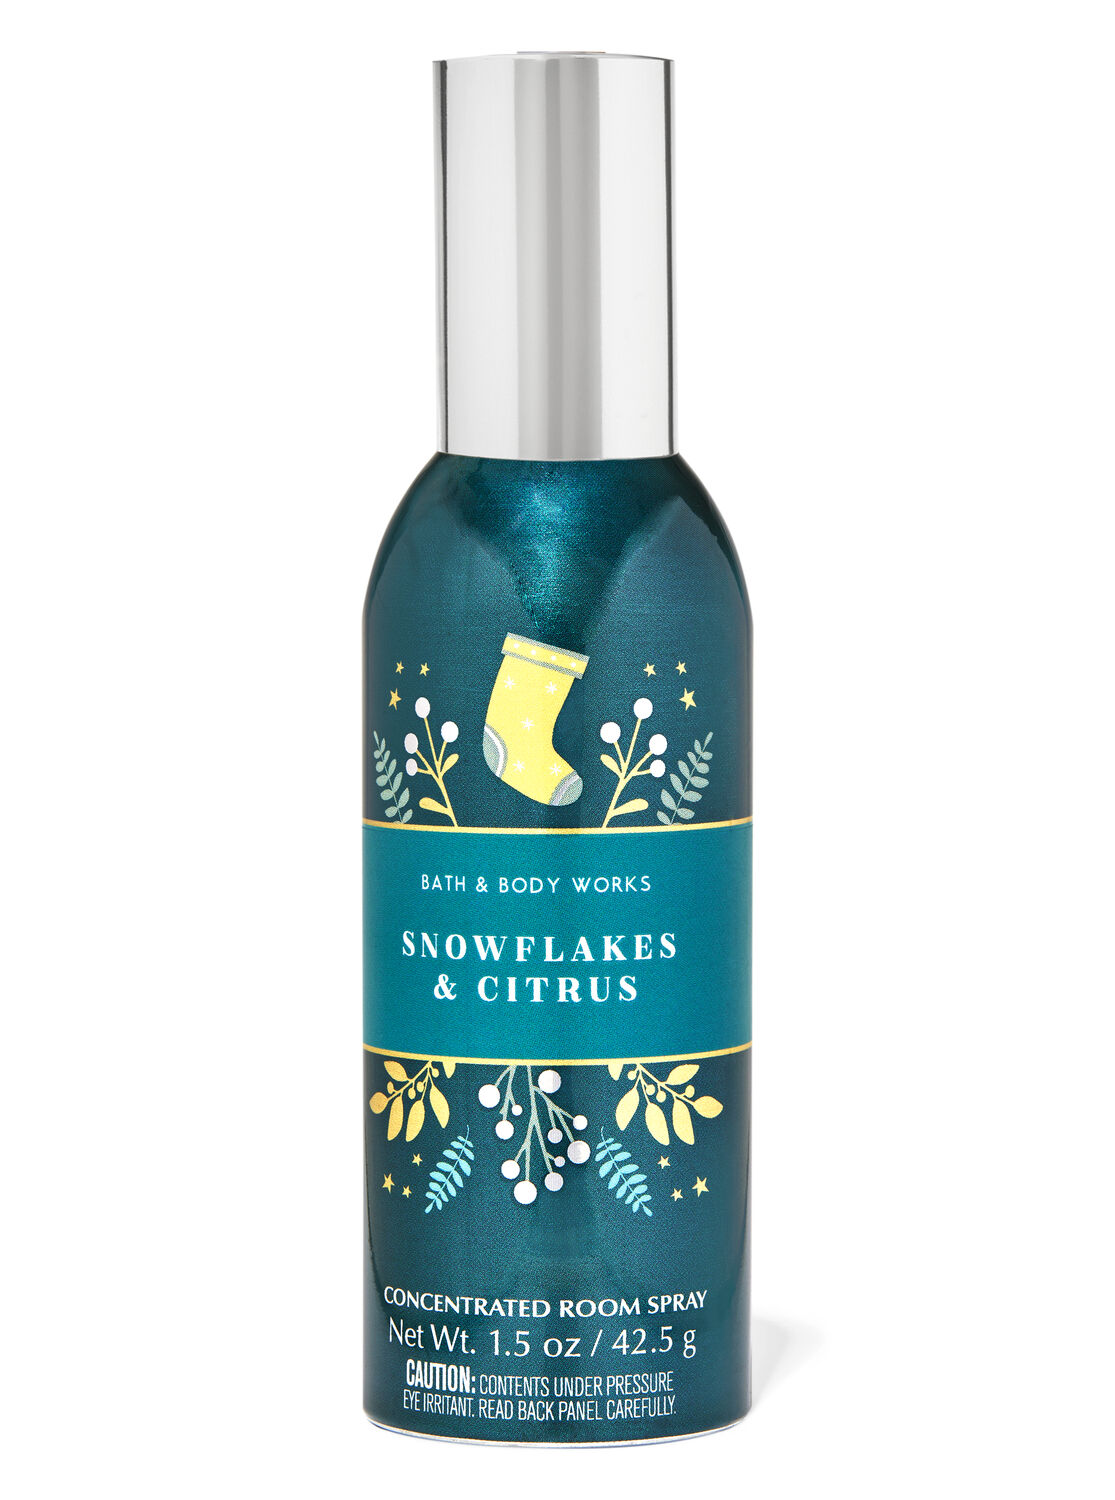 Snowflakes & Citrus Concentrated Room Spray